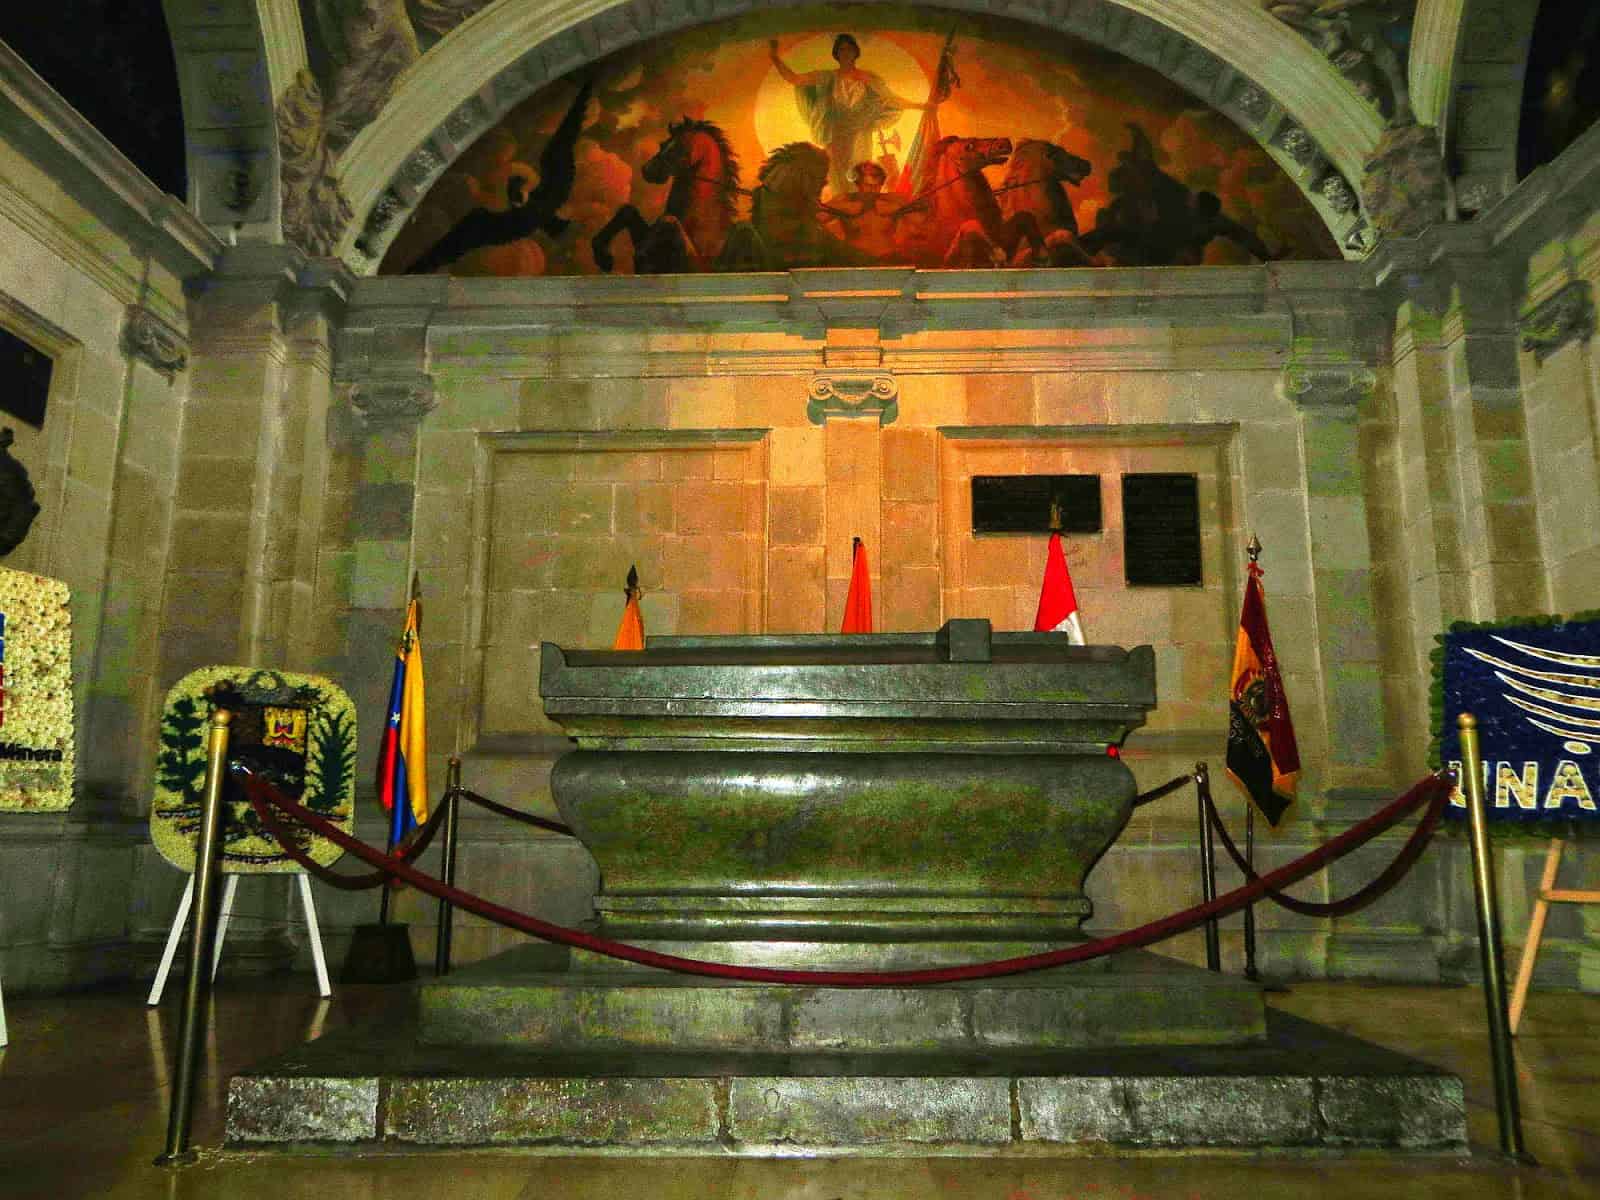 Mausoleum of Sucre (image courtesy of cuyabenolodge.com) at the Metropolitan Cathedral